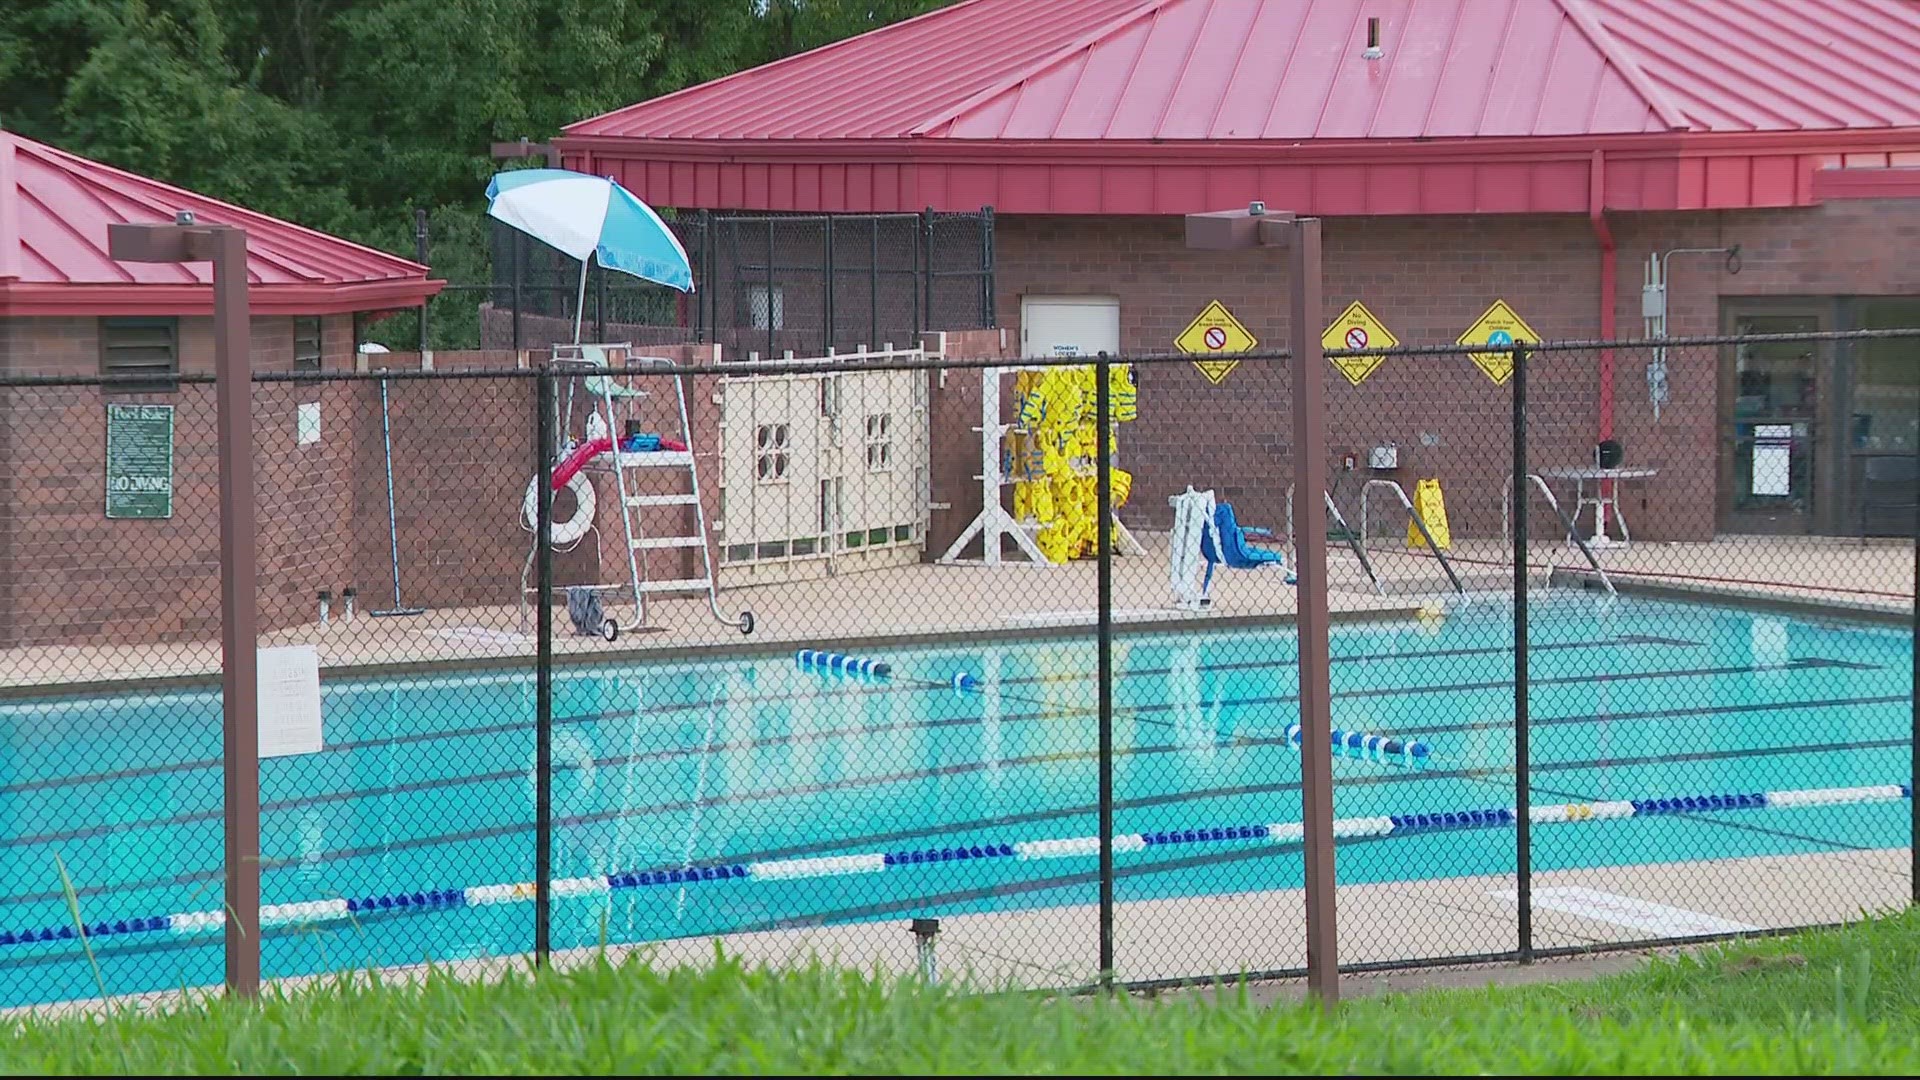 Two people were flown to a hospital on Thursday after a near drowning at the Theodore Hagans outdoor pool in Fort Lincoln Park in Northeast D.C.